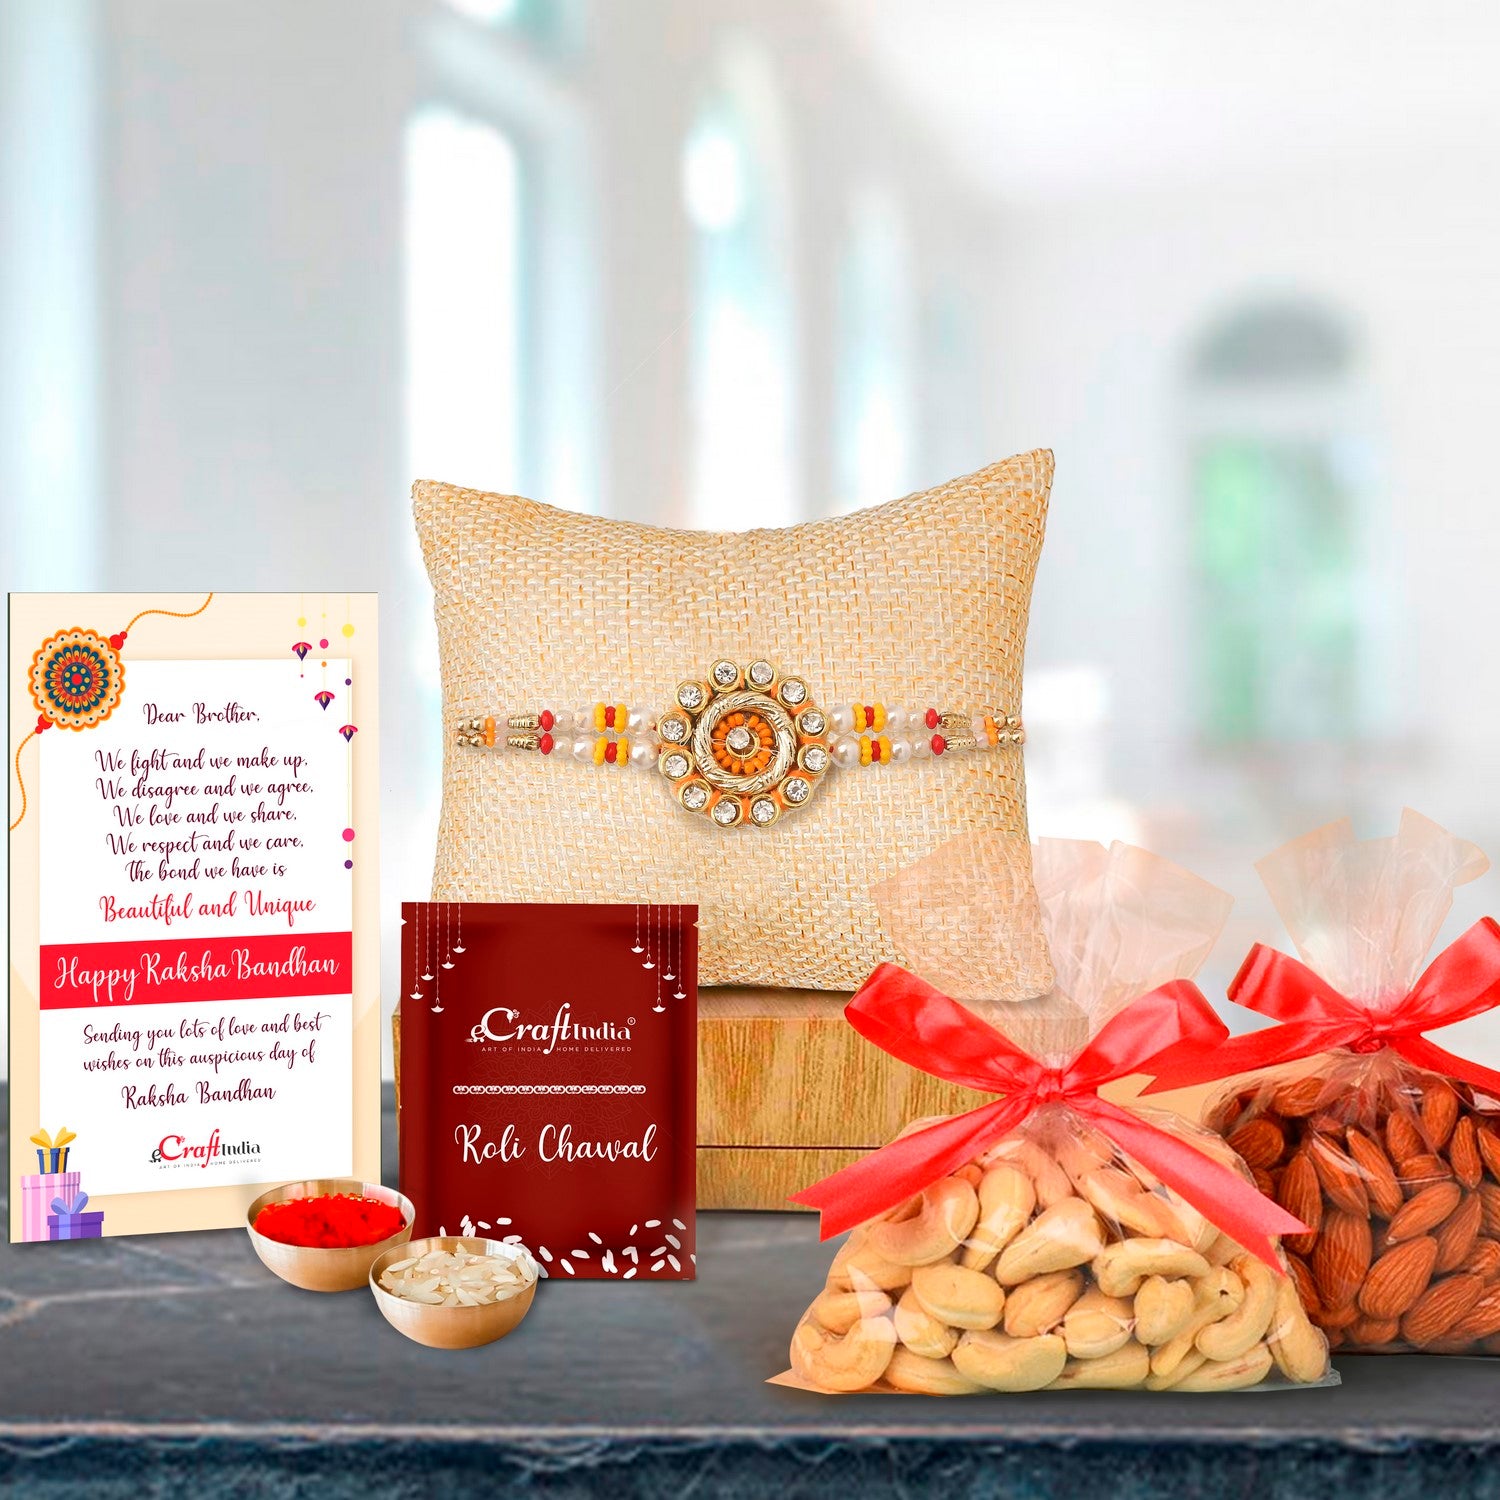 Designer Rakhi with Badam and Cashew (200 gm each, total 400 gm) and Roli Chawal Pack, Best Wishes Greeting Card